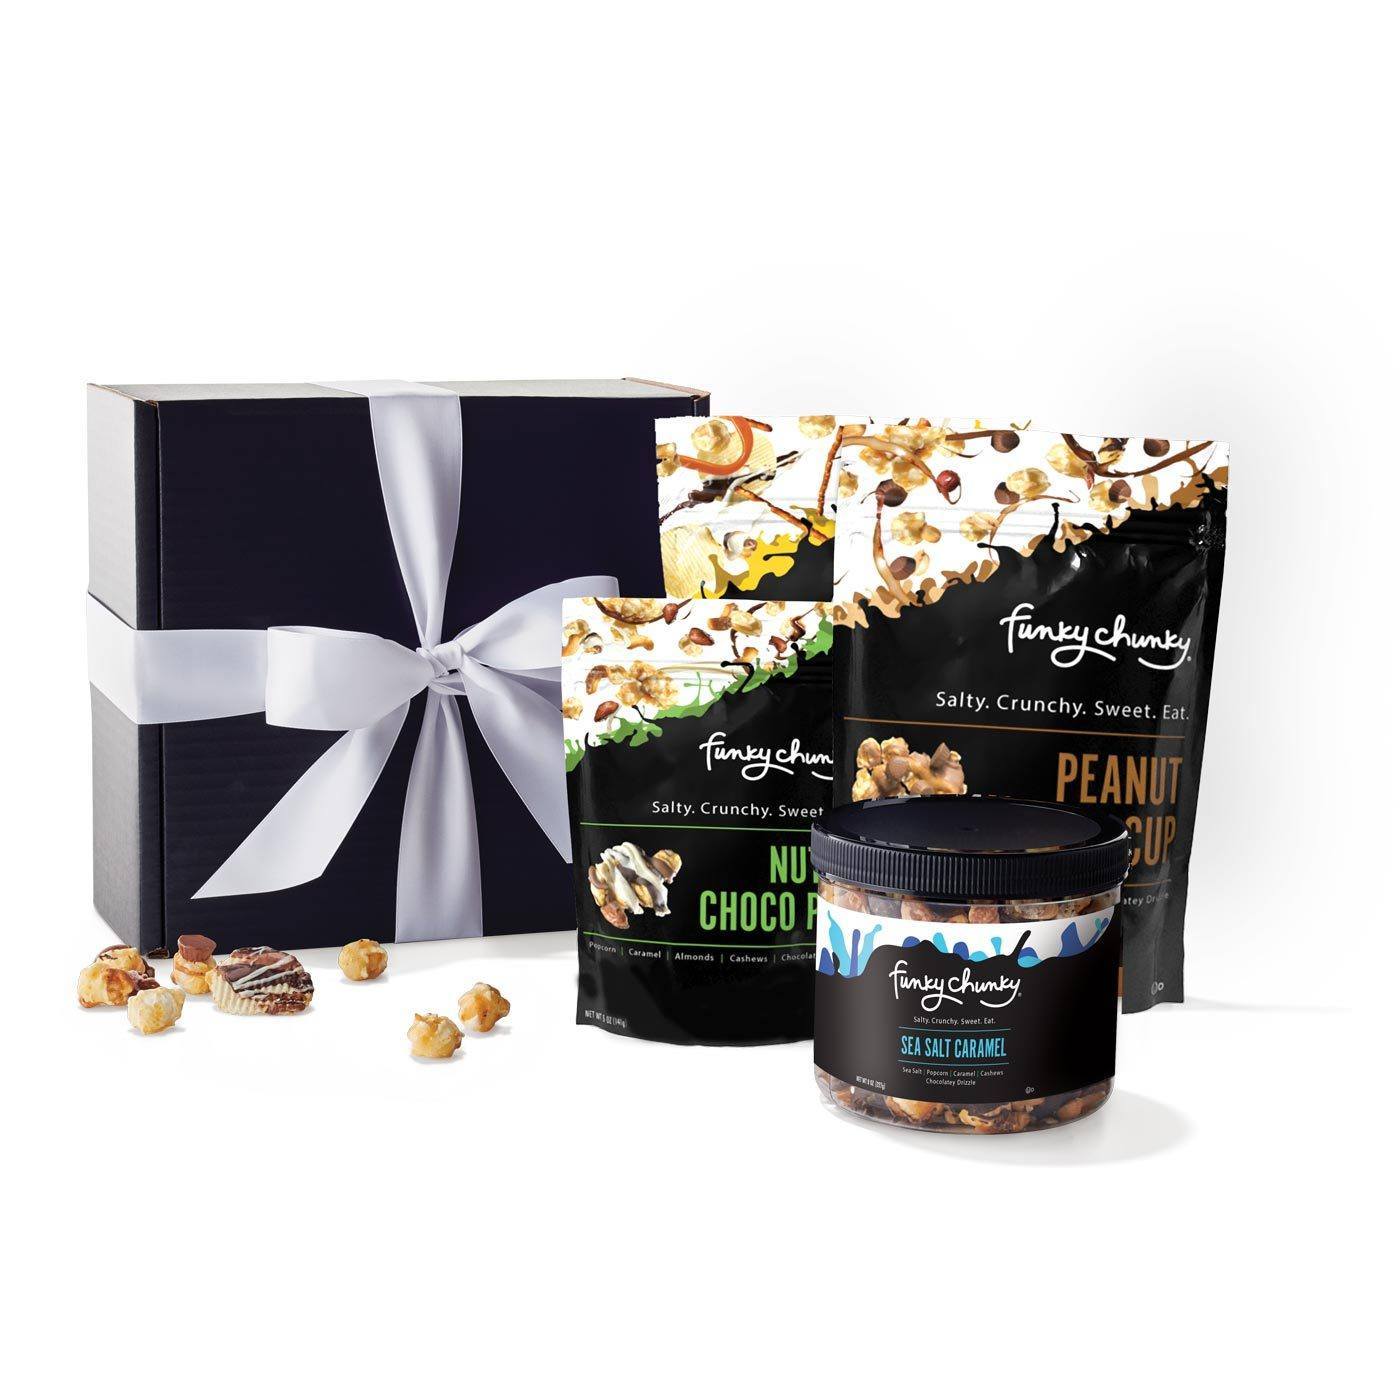 The Choir Gift-Different tones, different notes...it all makes for good music. The Choir is a Gift Pack ideal for a group: staff, colleagues, clients. A single 2 oz bag of Nutty Choco Pop, one 5 oz resealable bag each of Peanut Butter Cup and Chip Zel Pop and finally an 8 oz tub of Sea Salt Caramel. One 2 oz bag + two 5 oz bags + one 8 oz canister.-Funky Chunky